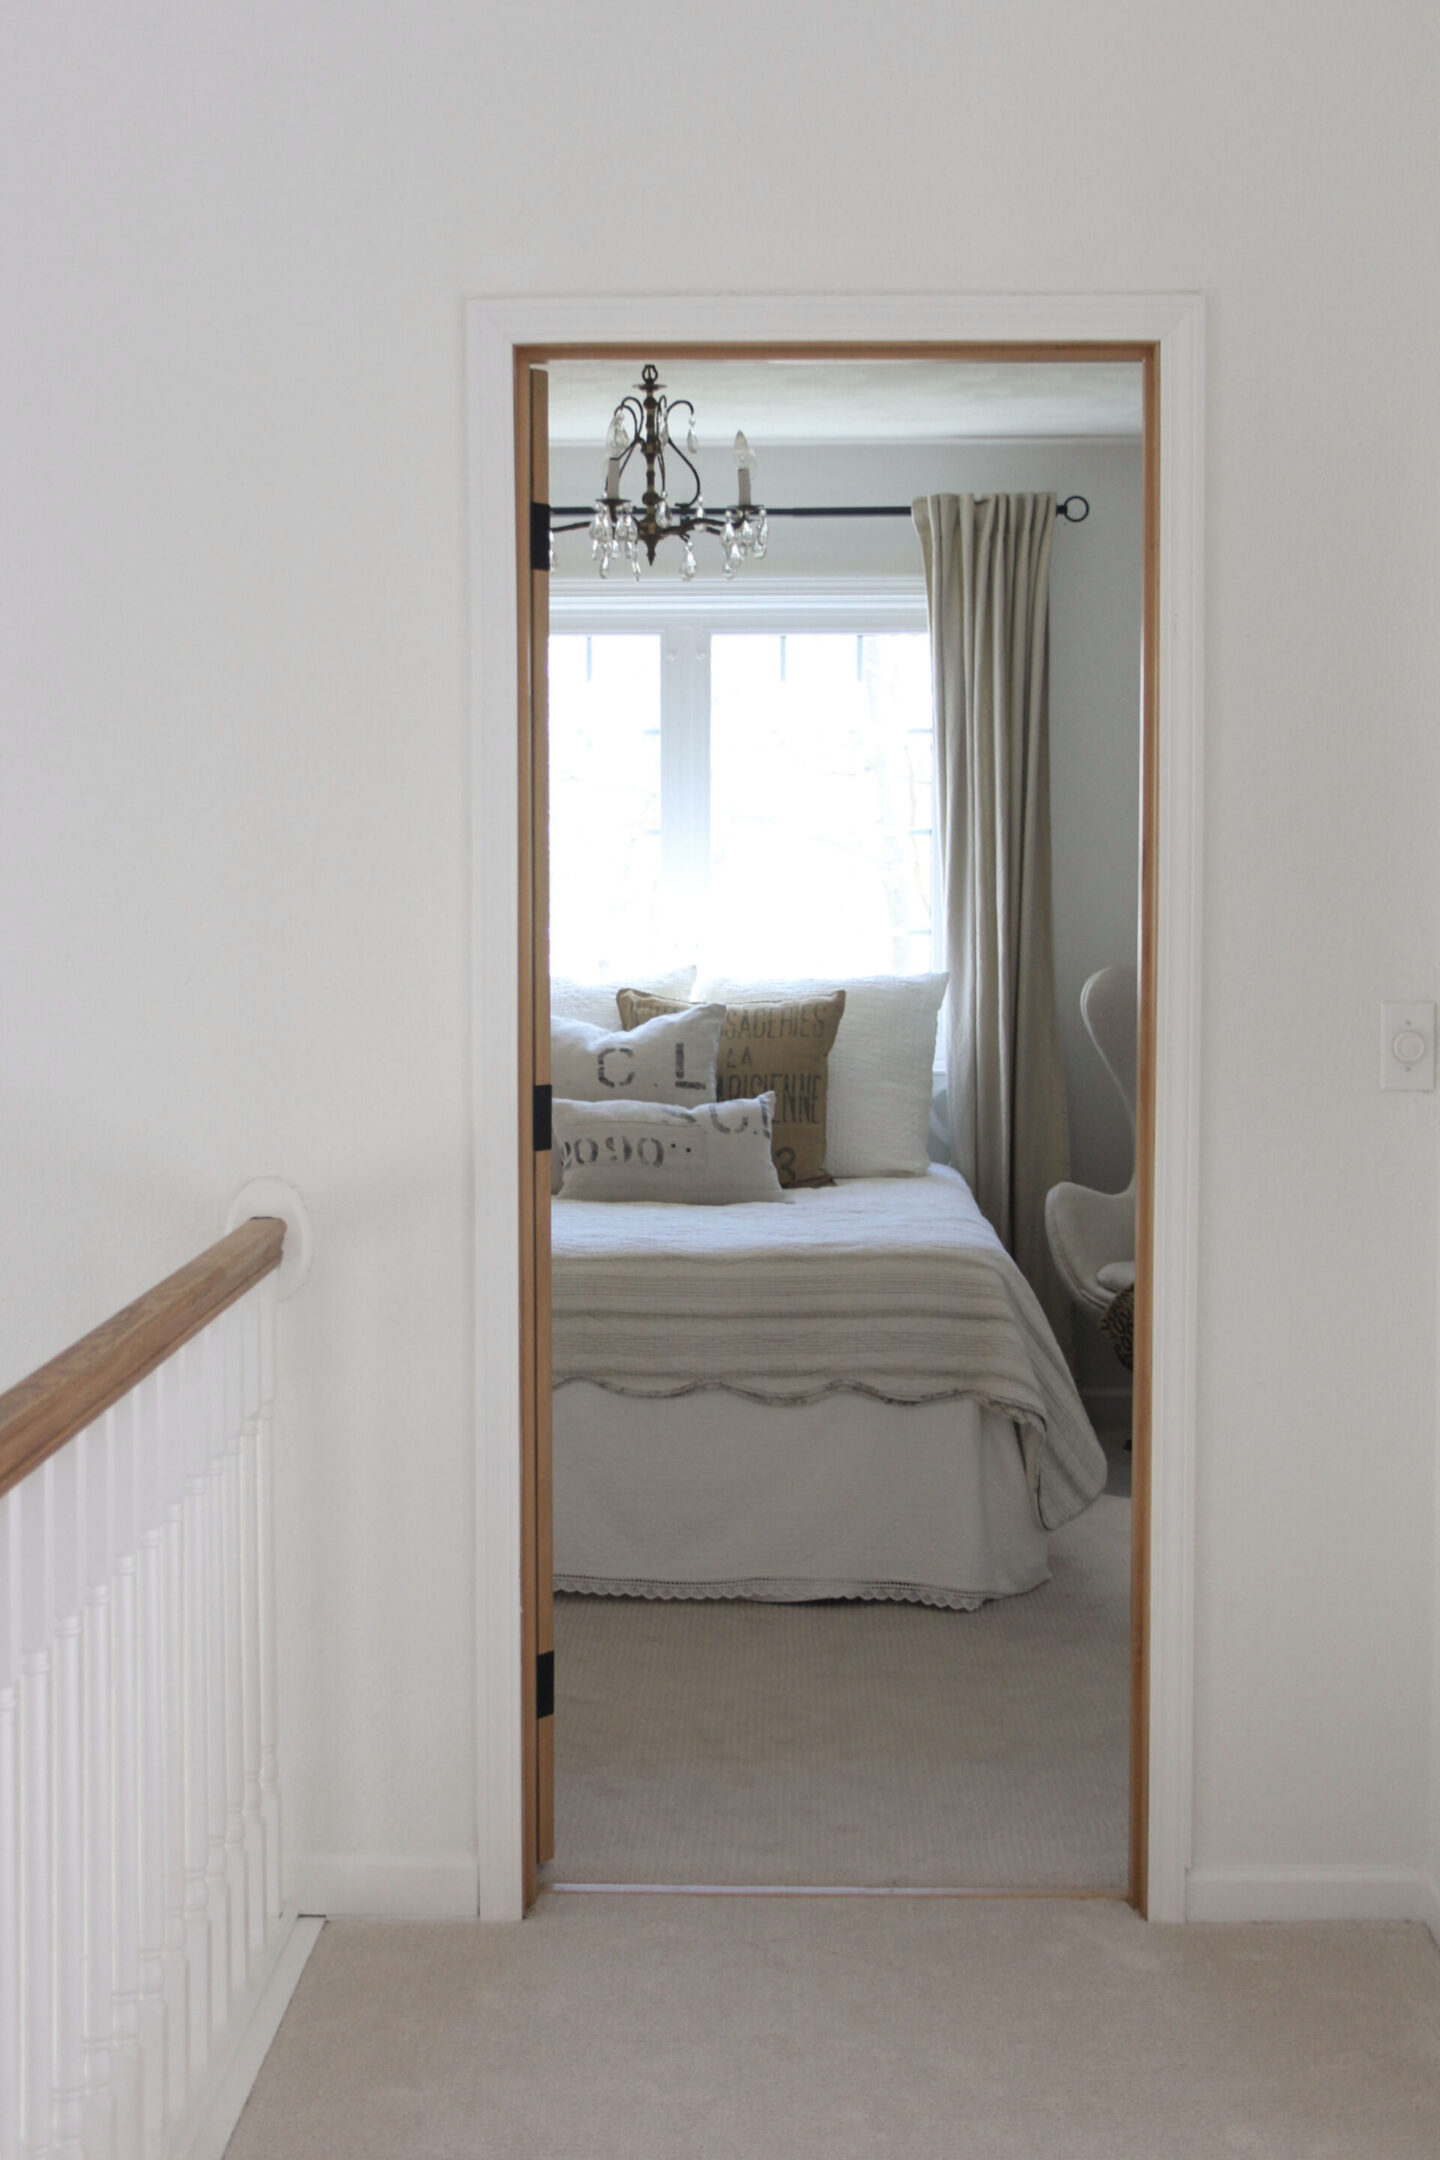 Hello Lovely's European country style bedroom with knotty alder door and walls painted BM White OC-151.